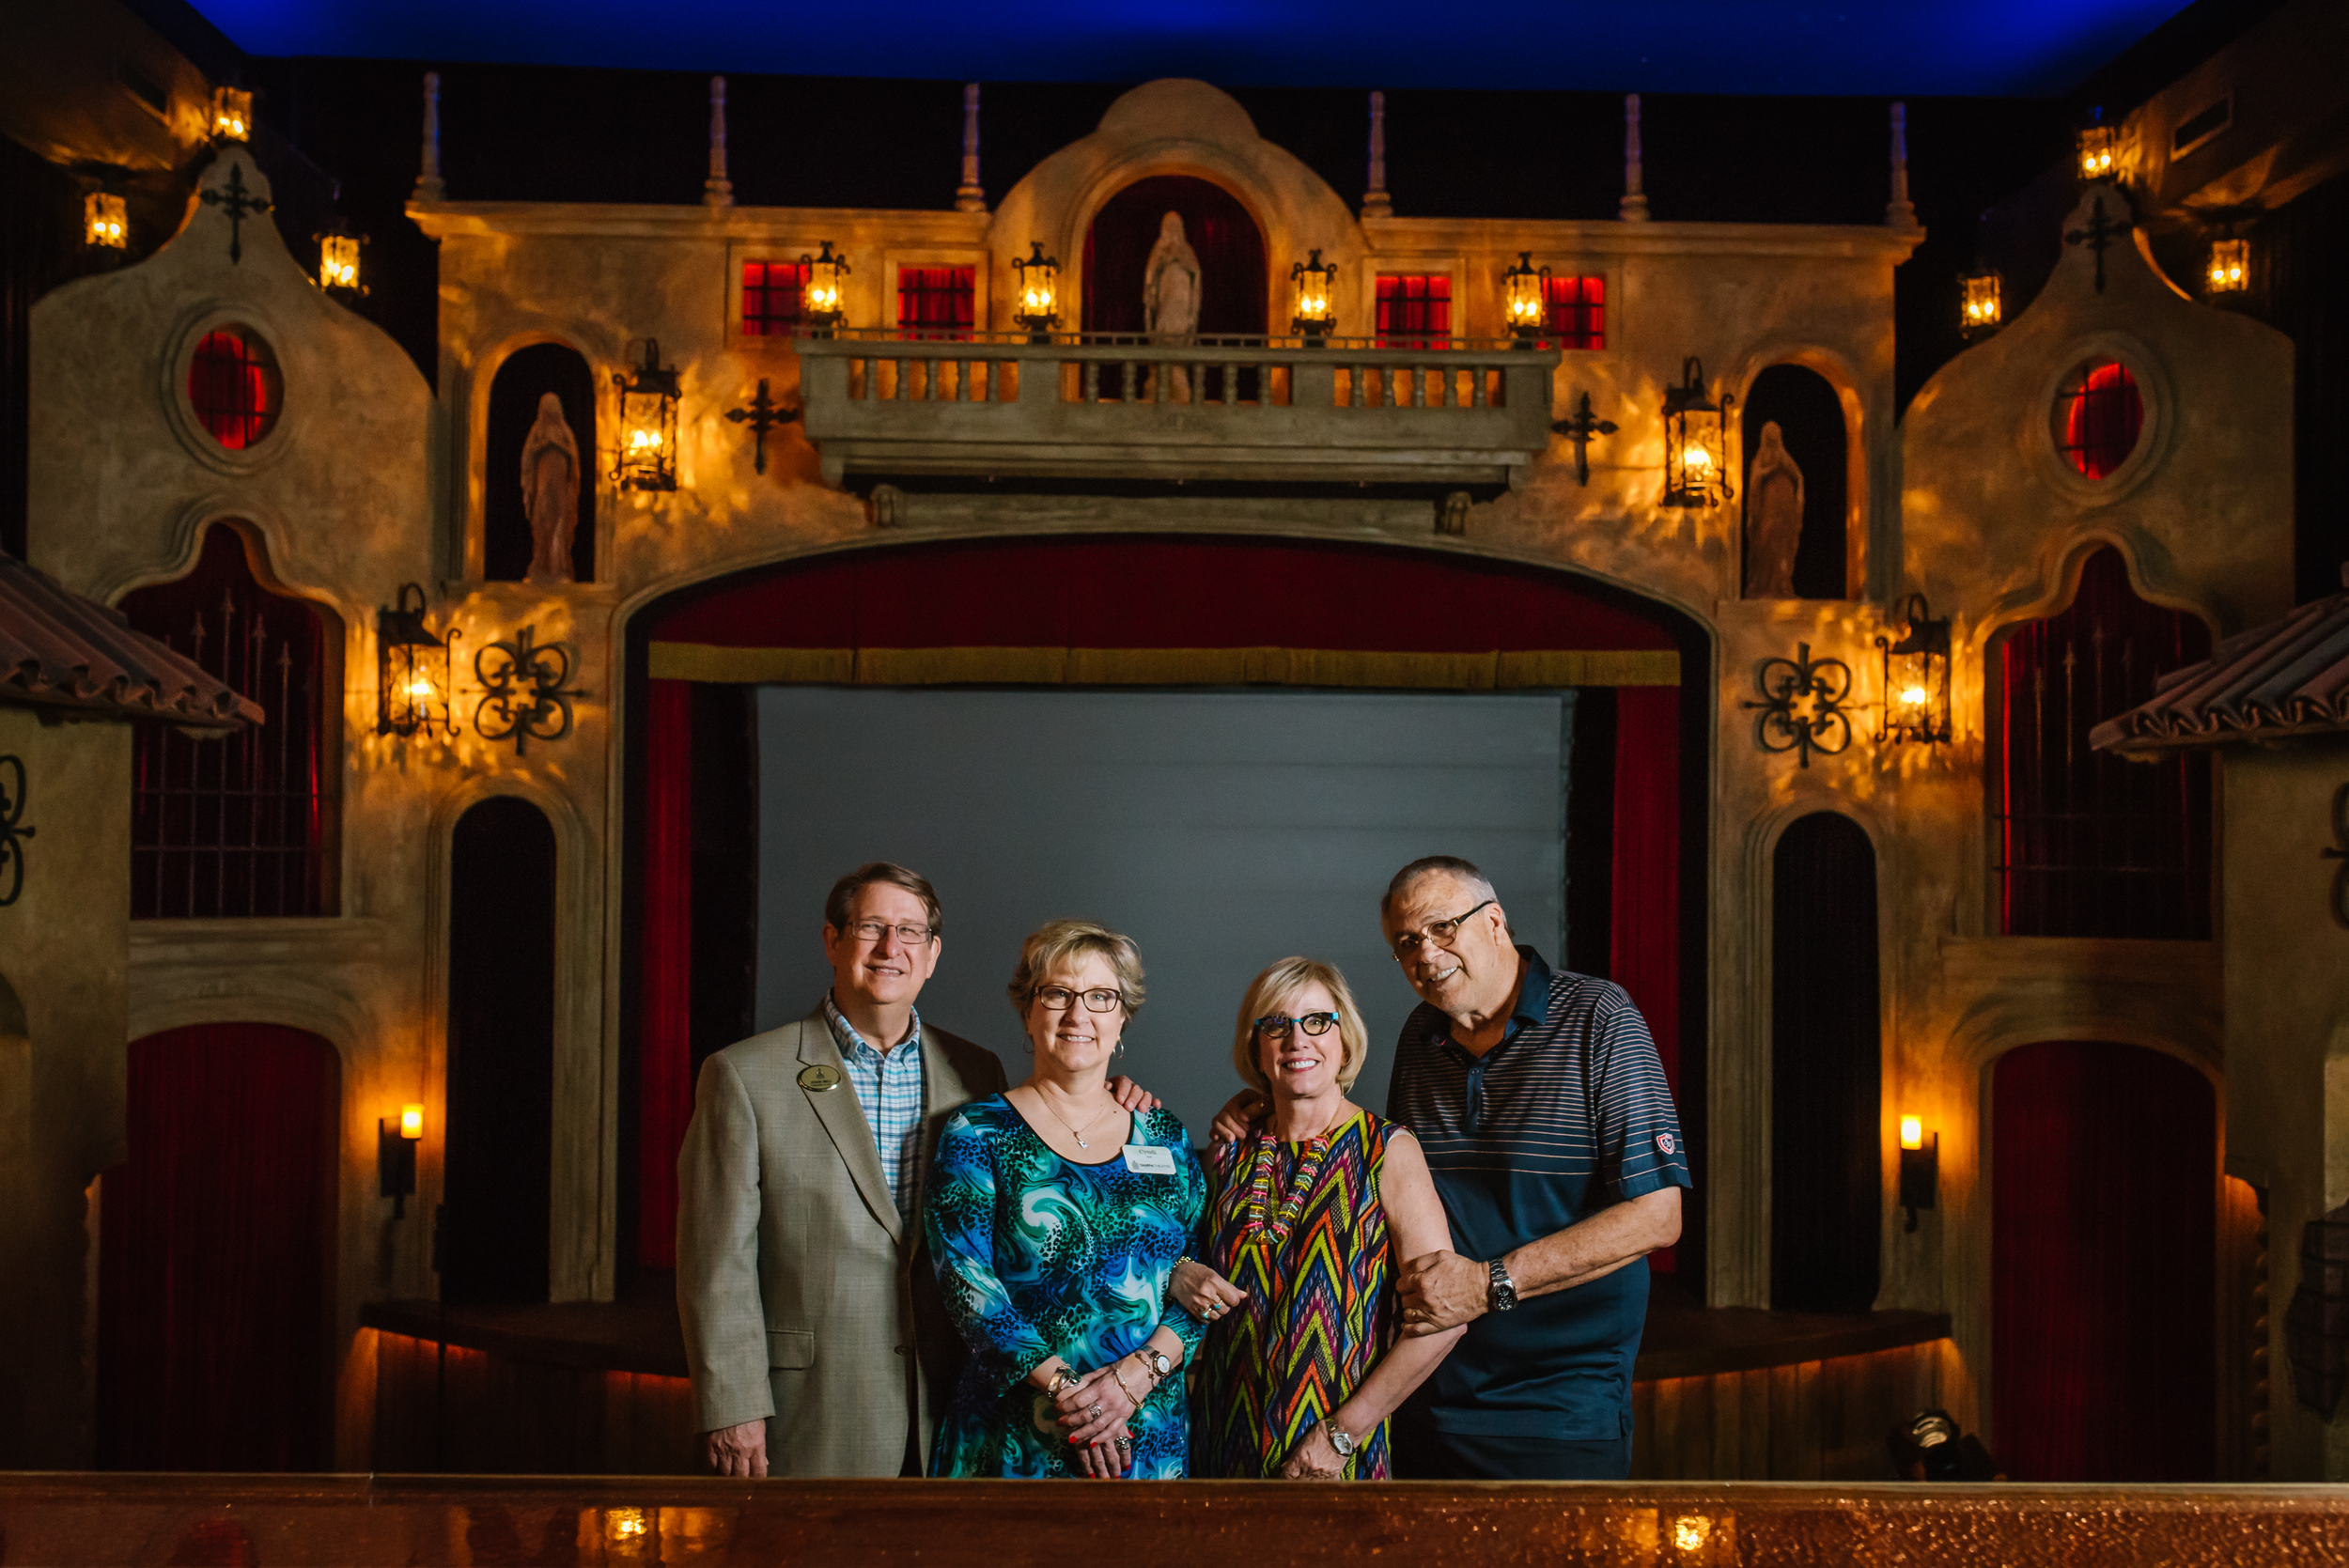 I also shot a few more events with the Tampa Theater! I was honored to cover a party at one of the home of one of their biggest sponsors. They have a mini replica of the theater in the house!